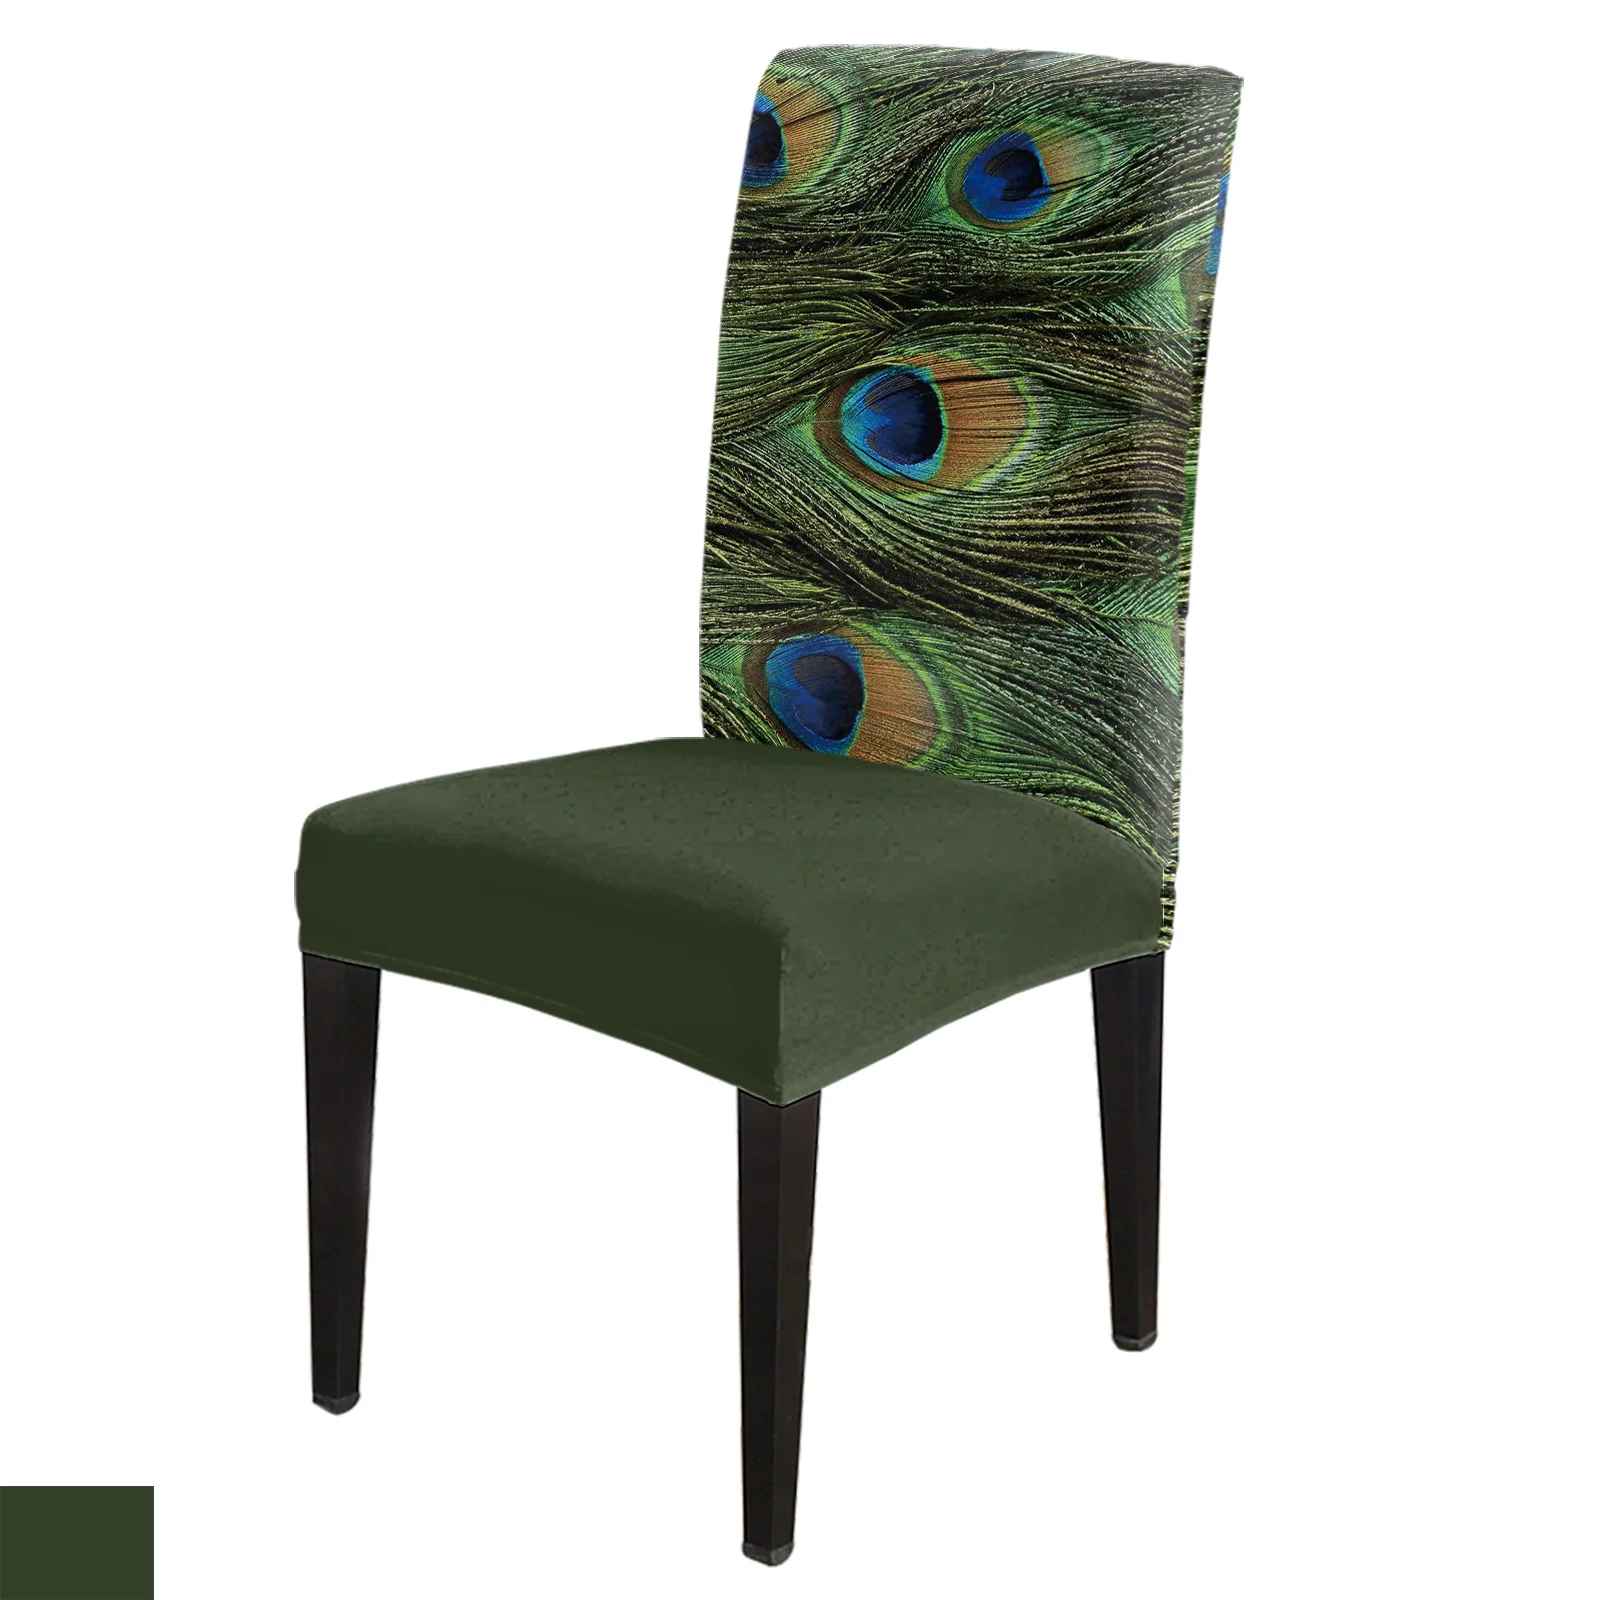 

Green Animal Peacock Feather Dining Chair Cover 4/6/8PCS Spandex Elastic Chair Slipcover Case for Wedding Home Dining Room